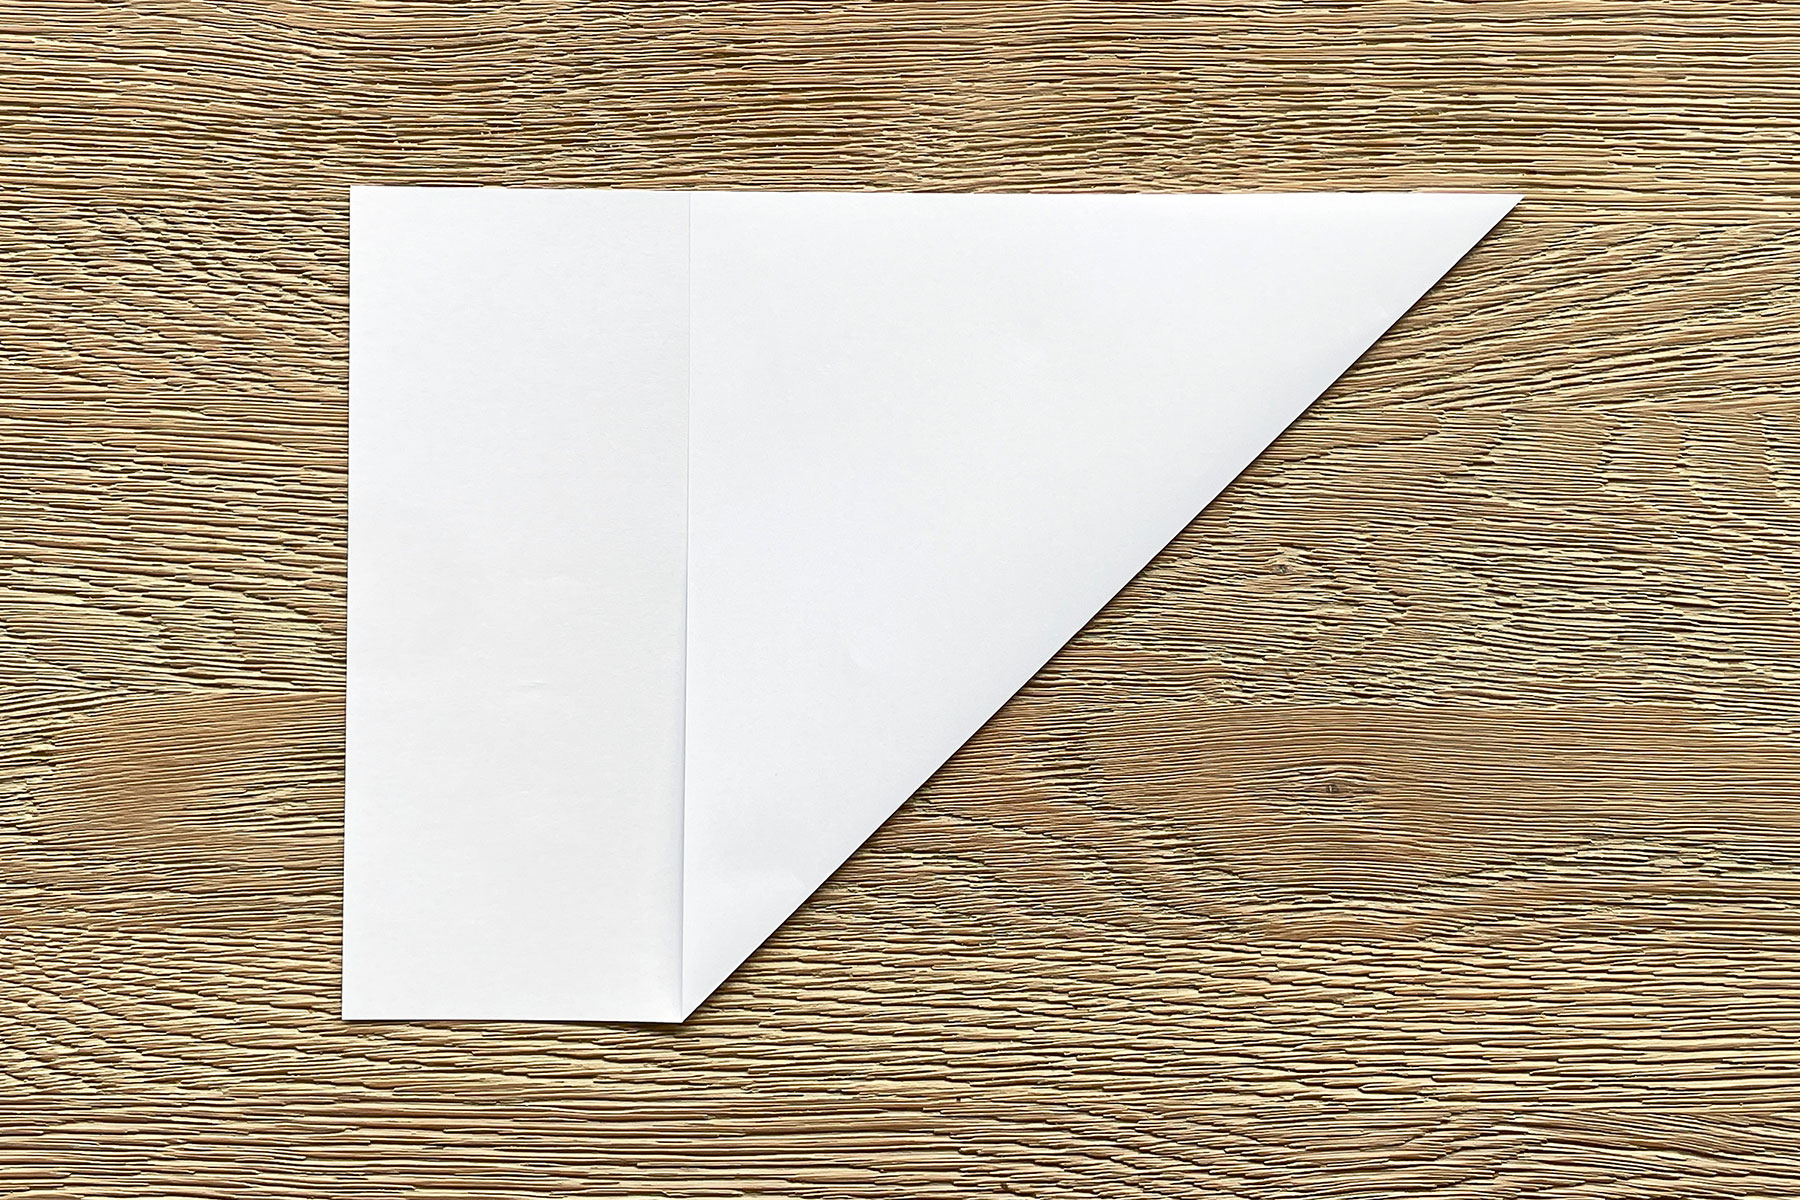 A photo of a piece of white A4 paper that has been folded to turn it into a square